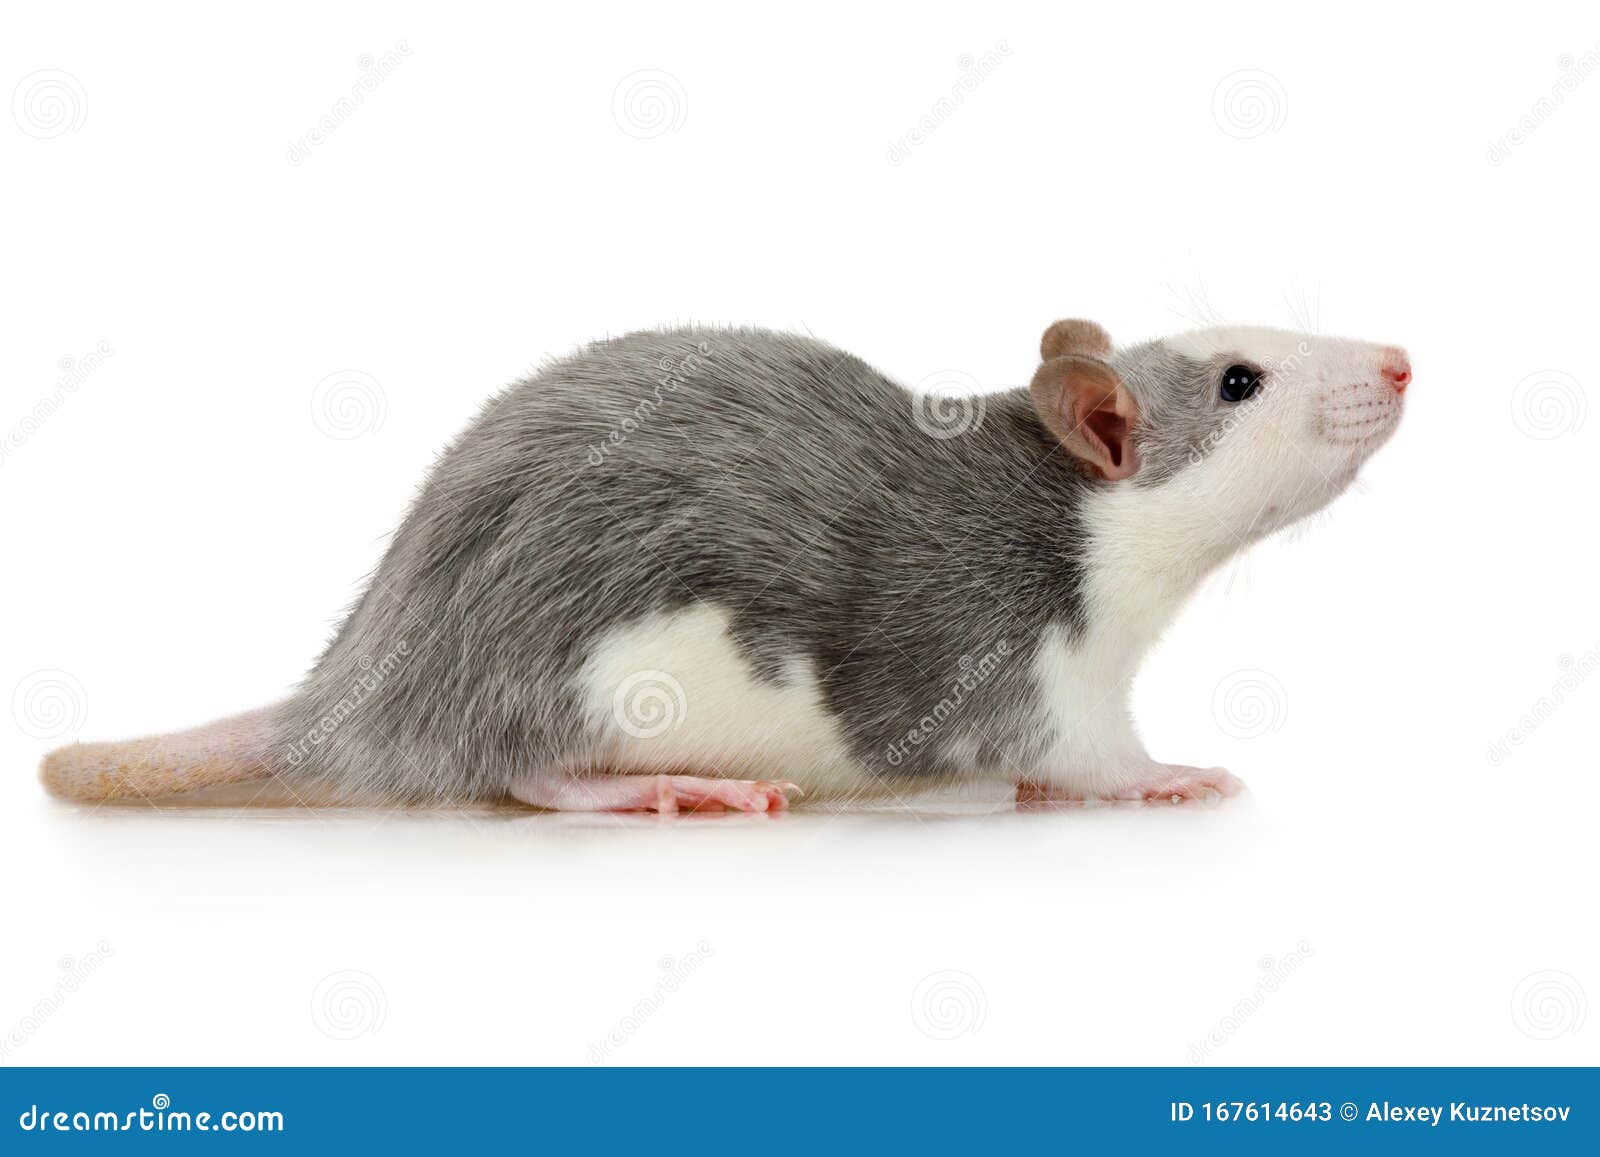 Little Cute Rat Sits on a White Background Stock Image - Image of ...